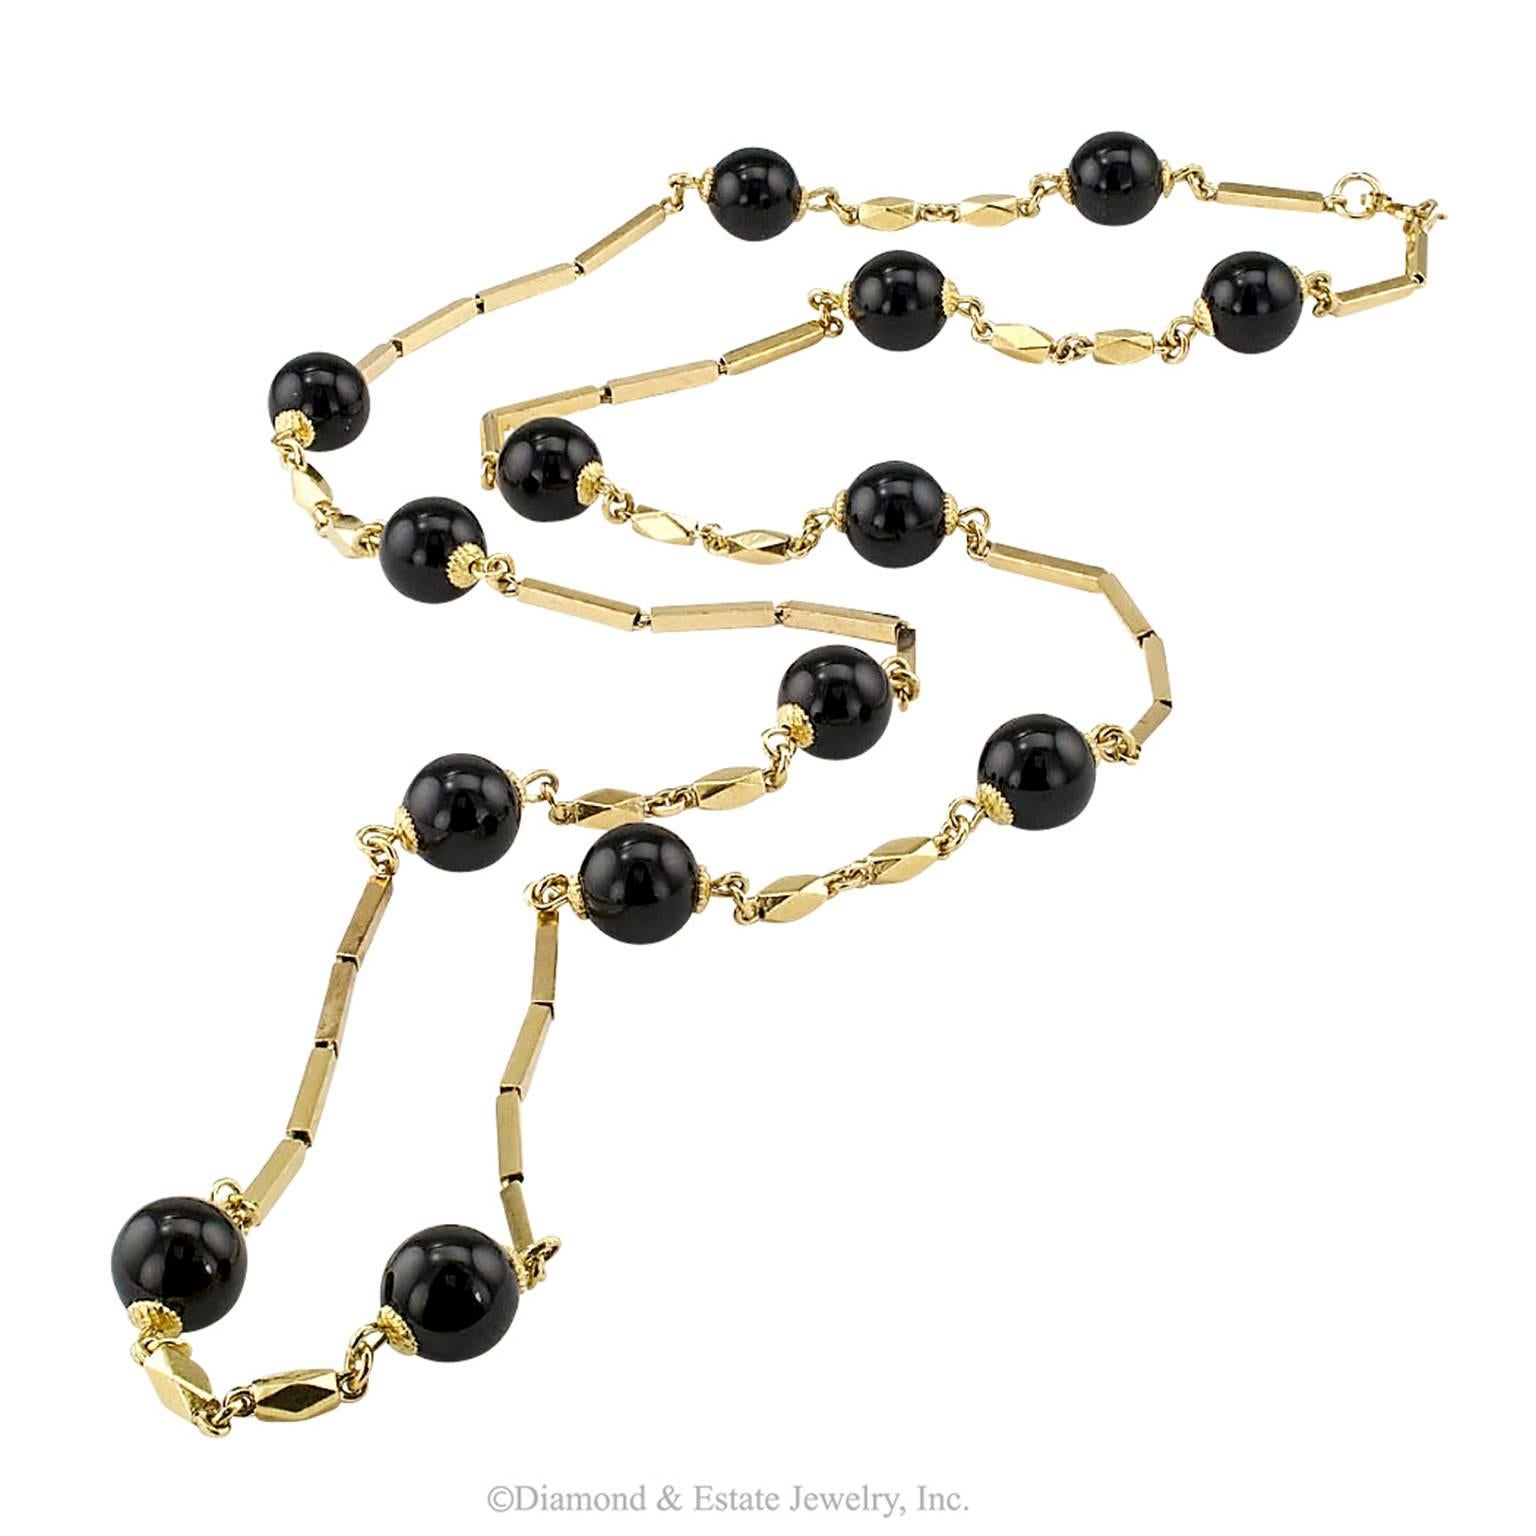 1960s Onyx Gold Chain Necklace

1960s onyx beads and 18 karat yellow gold links chain necklace.  A timeless design featuring slender baton gold links connected, at intervals, to round onyx beads separated by twin diamond-sided, elongated gold 